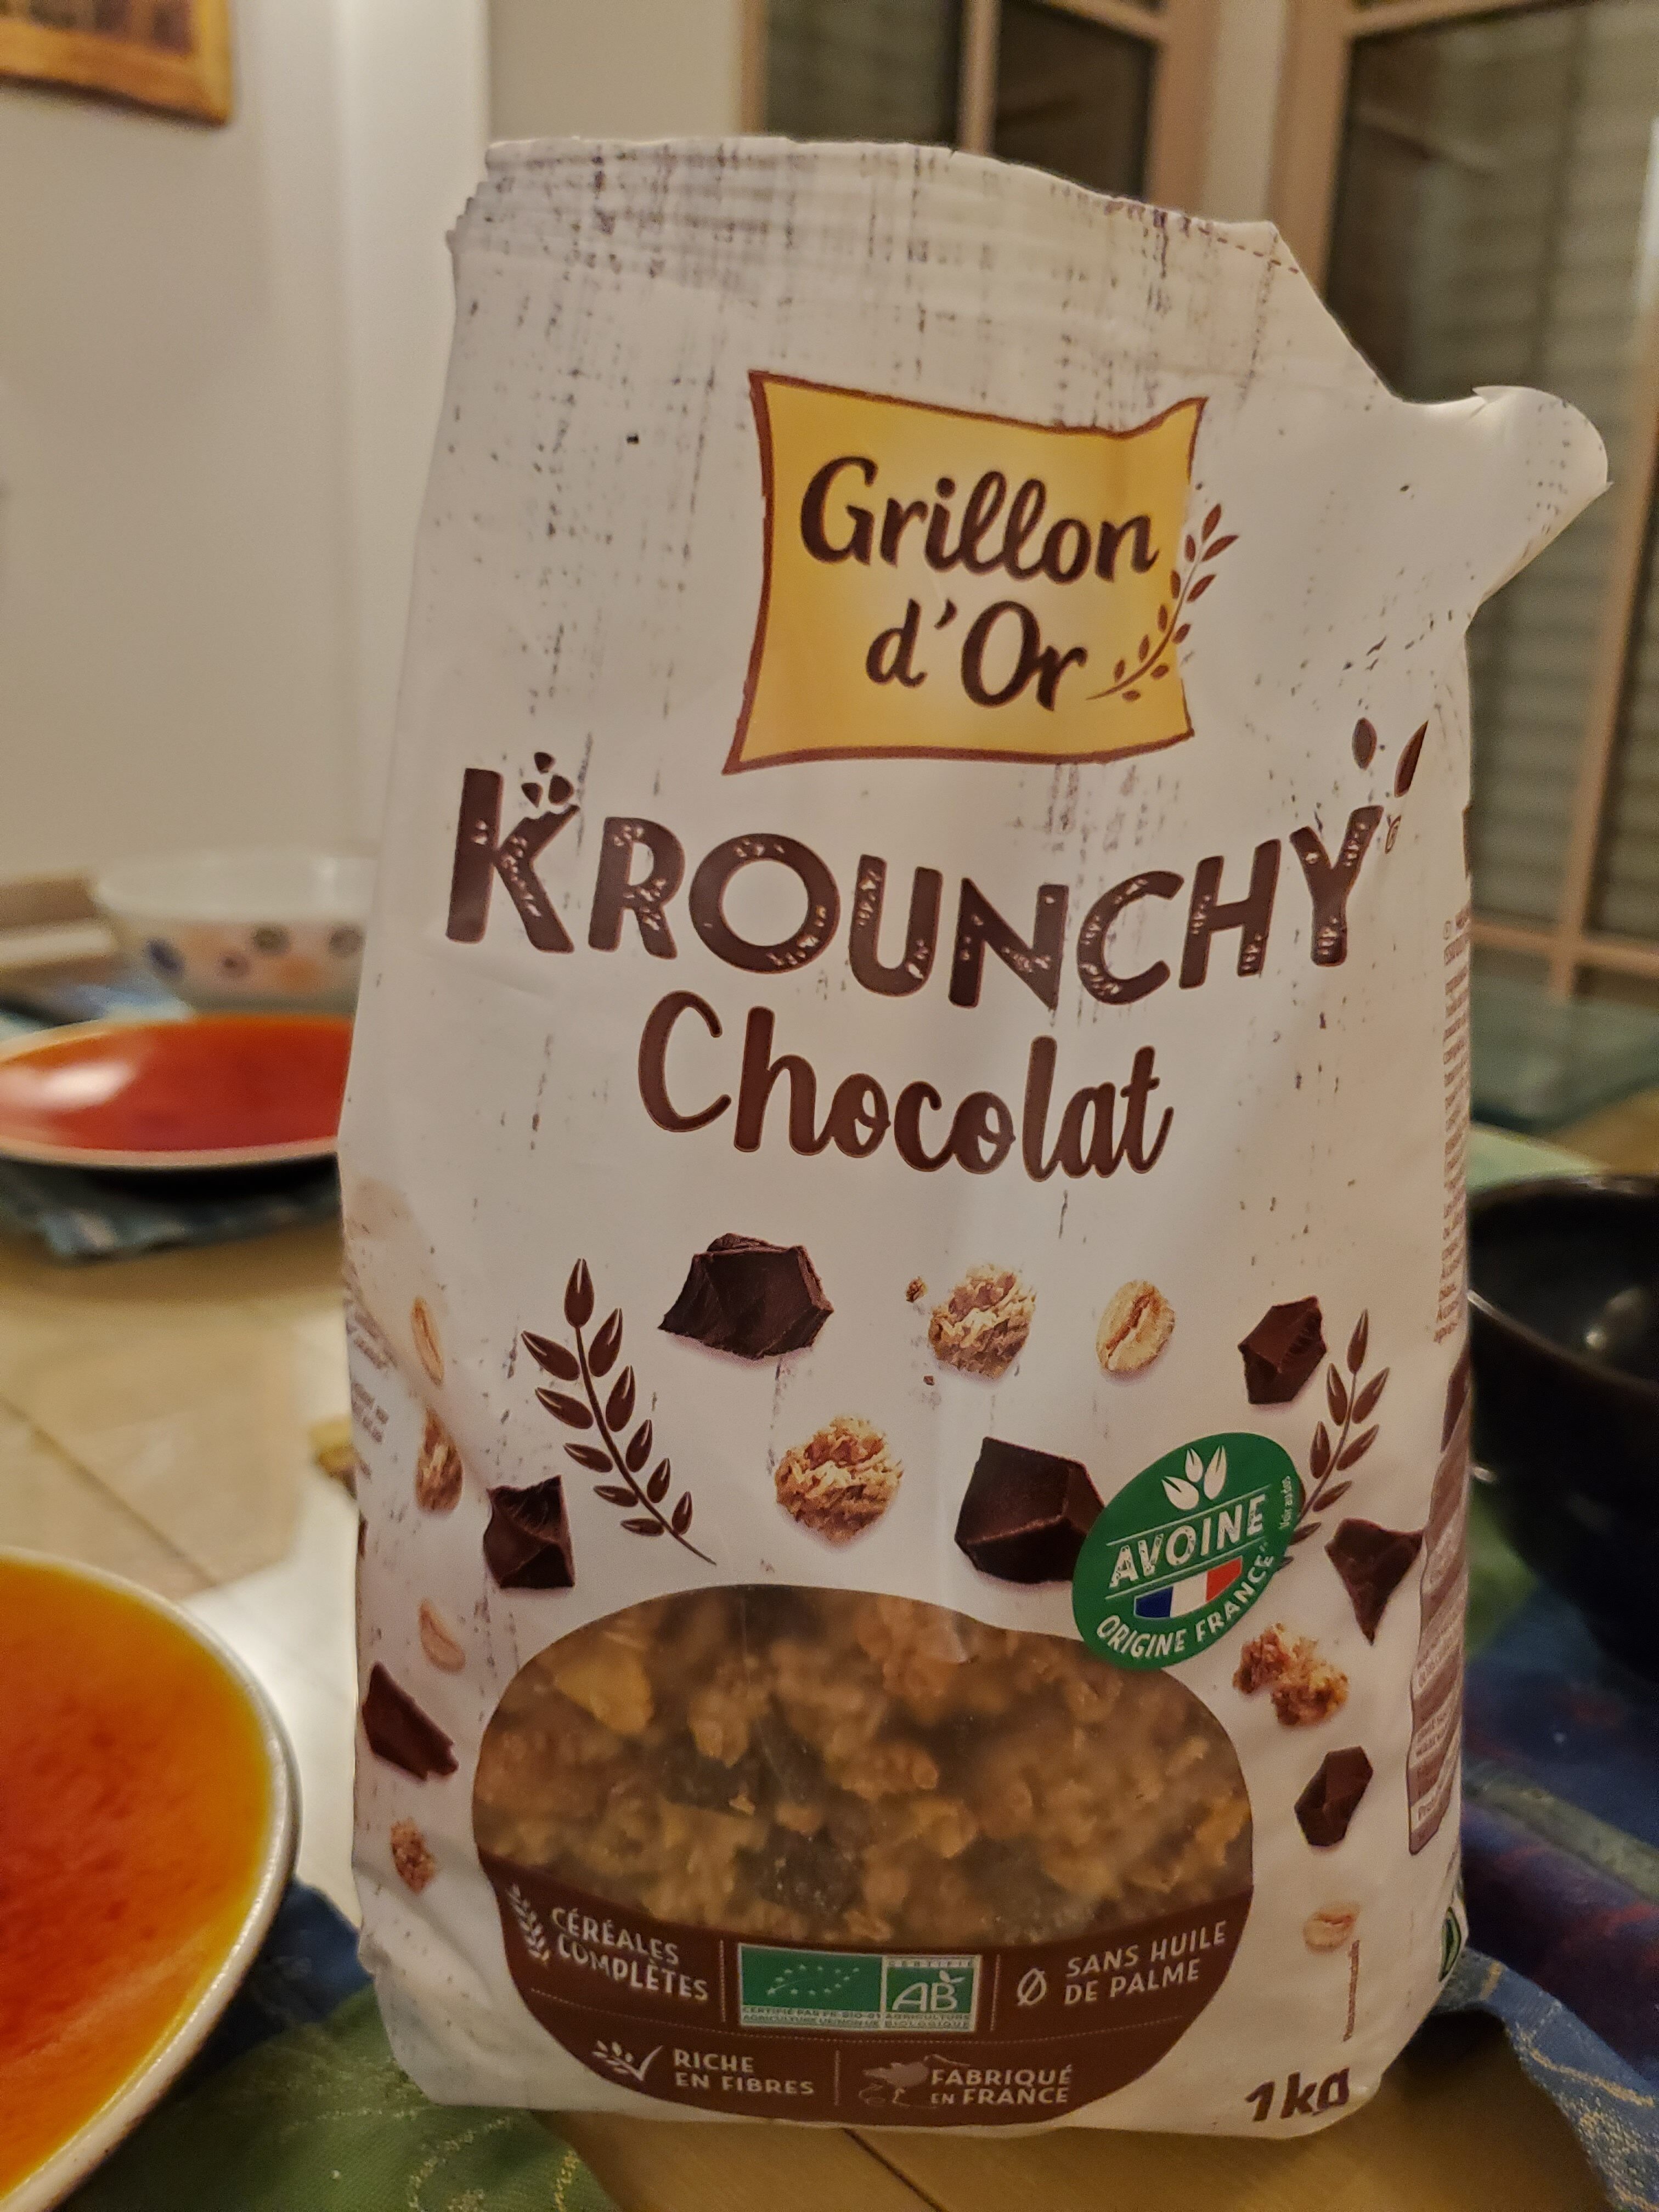 Krounchy chocolat - Product - fr